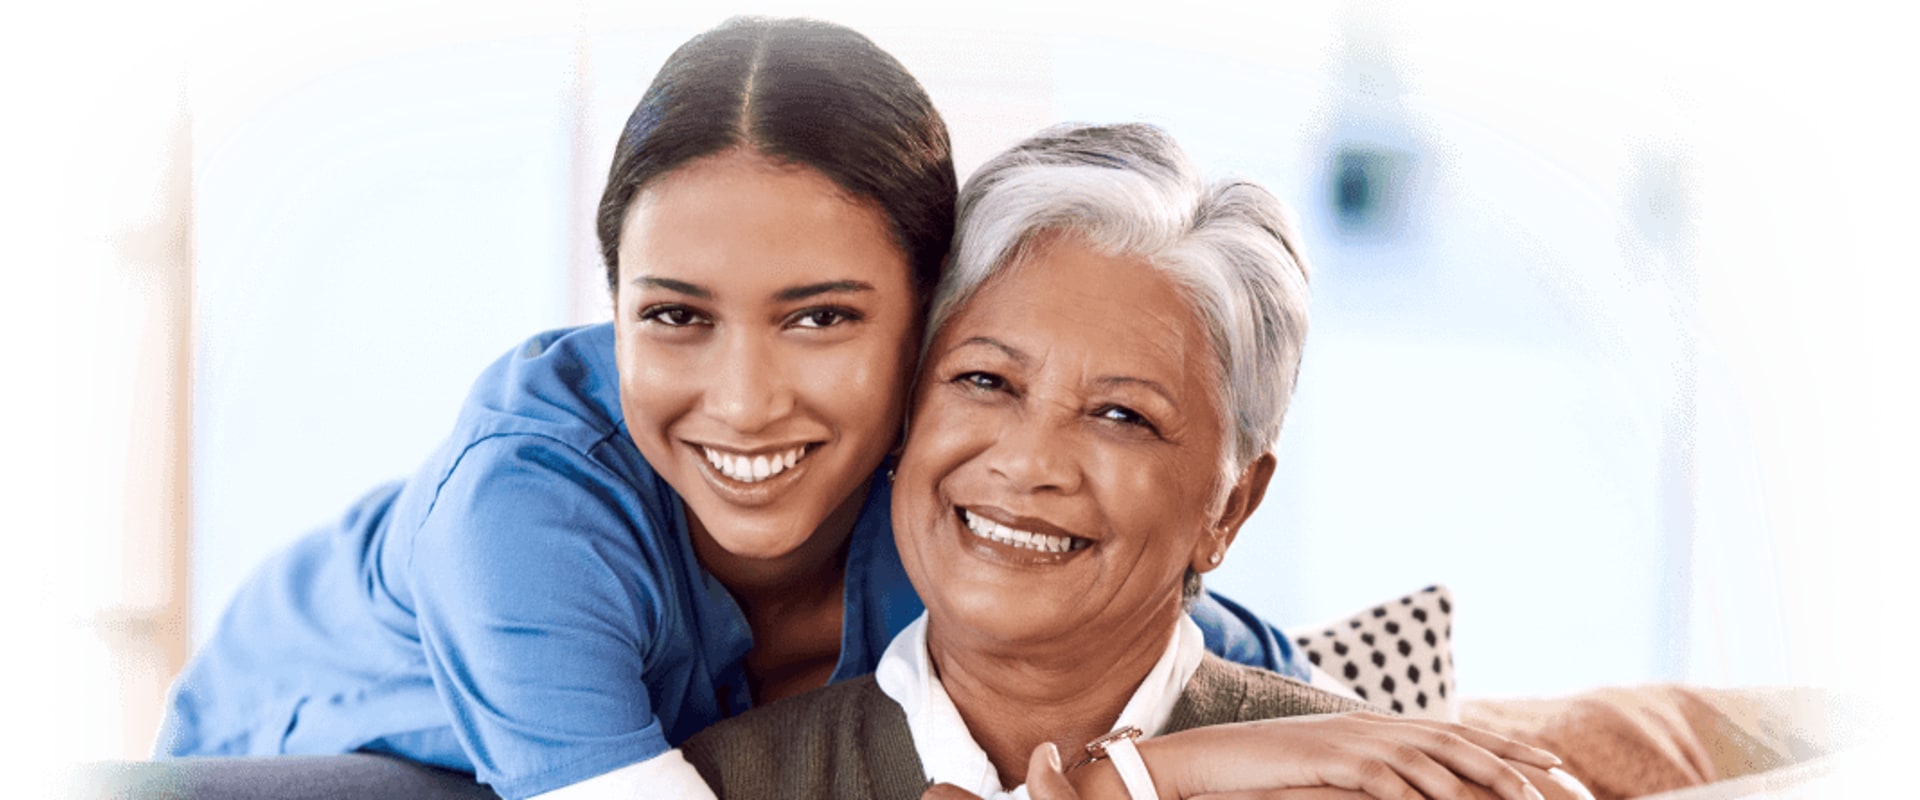 Adult Day Care Services for Caregivers in Orange County